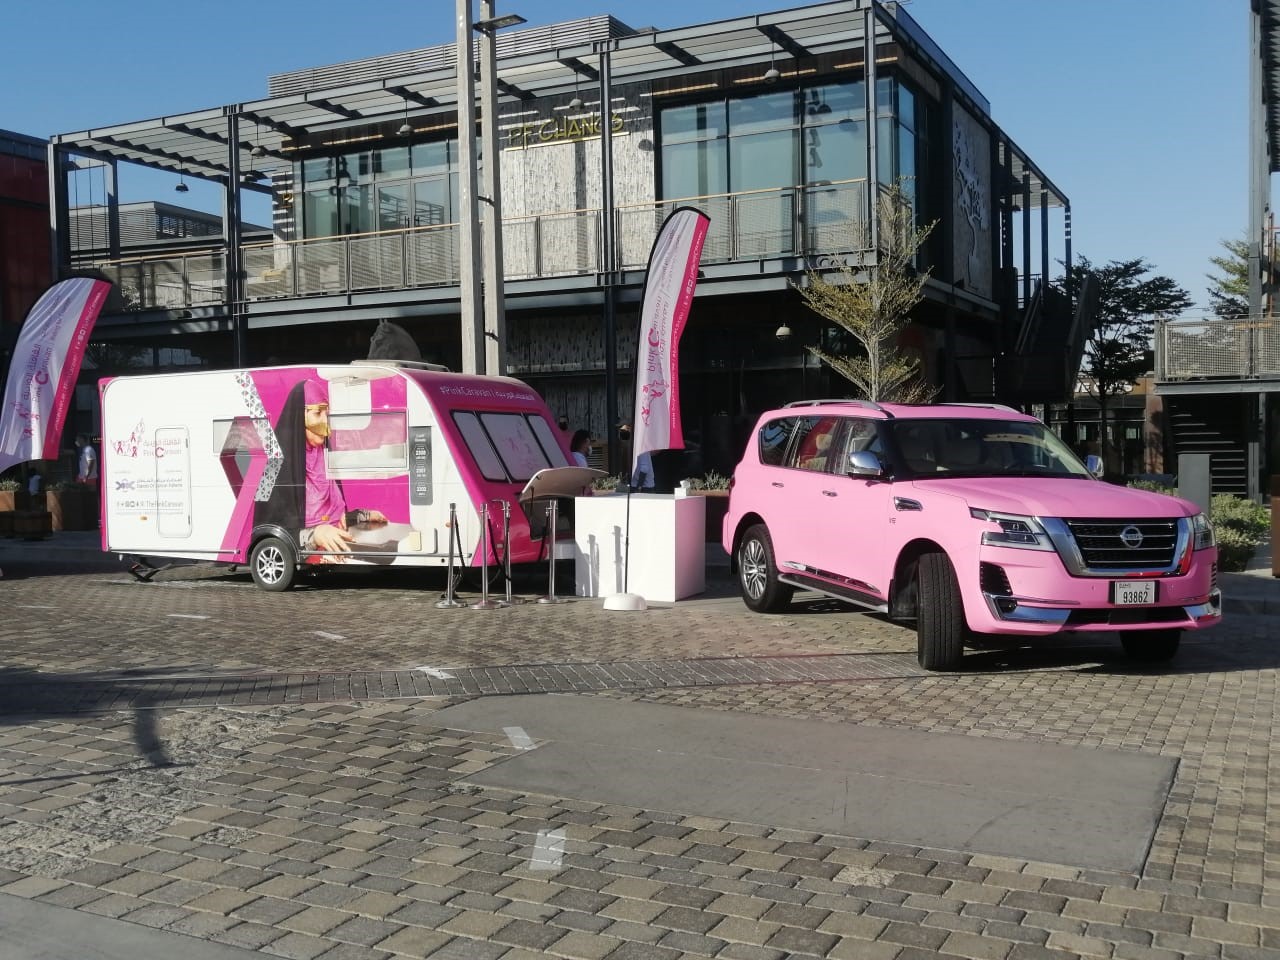 2020 Nissan Patrol goes pink for Breast Cancer Awareness Month